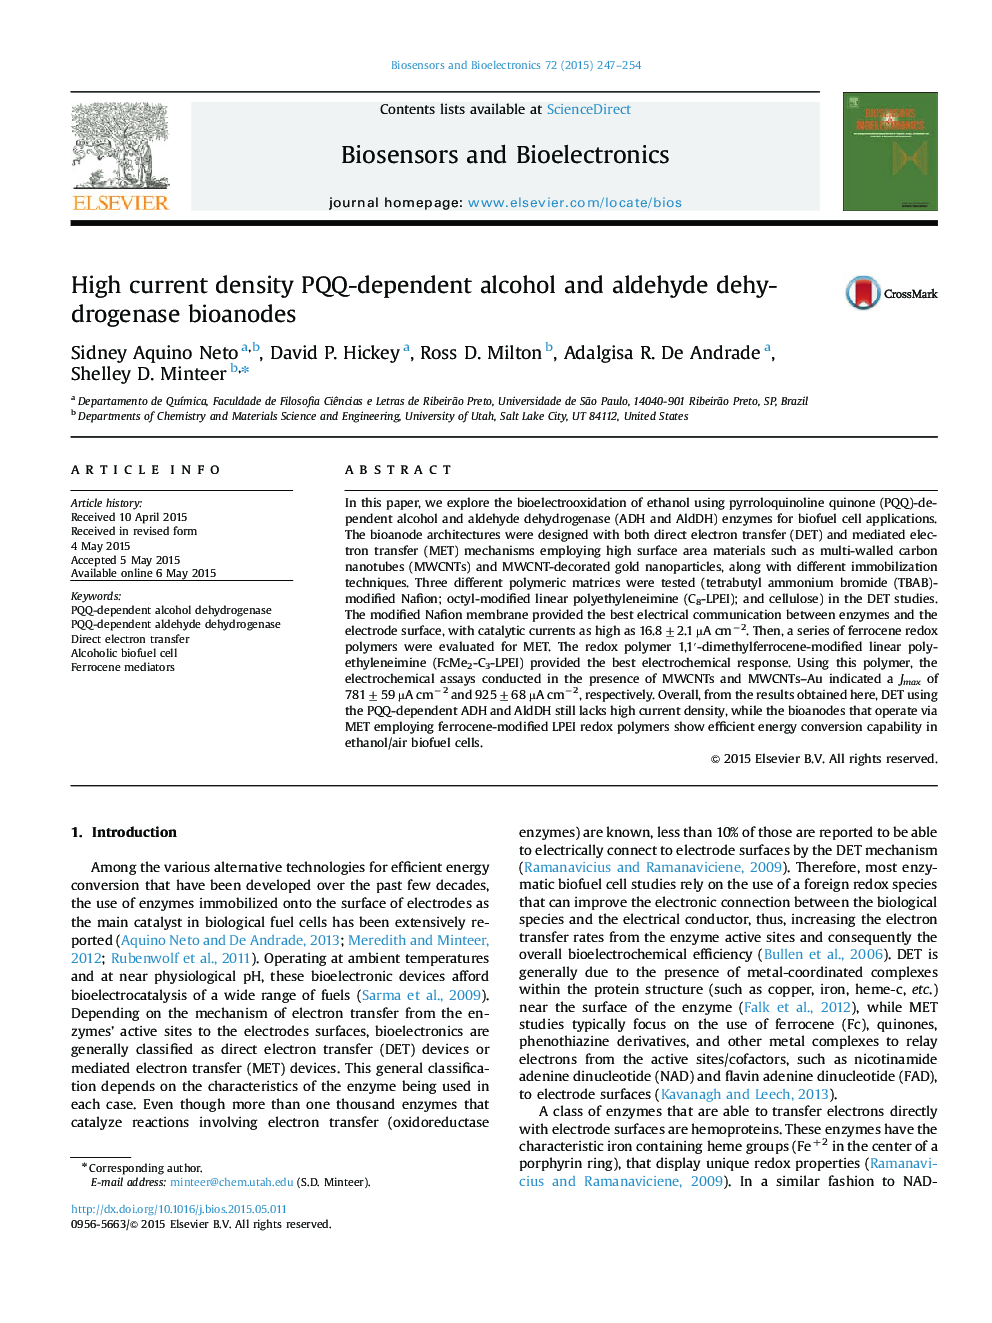 High current density PQQ-dependent alcohol and aldehyde dehydrogenase bioanodes